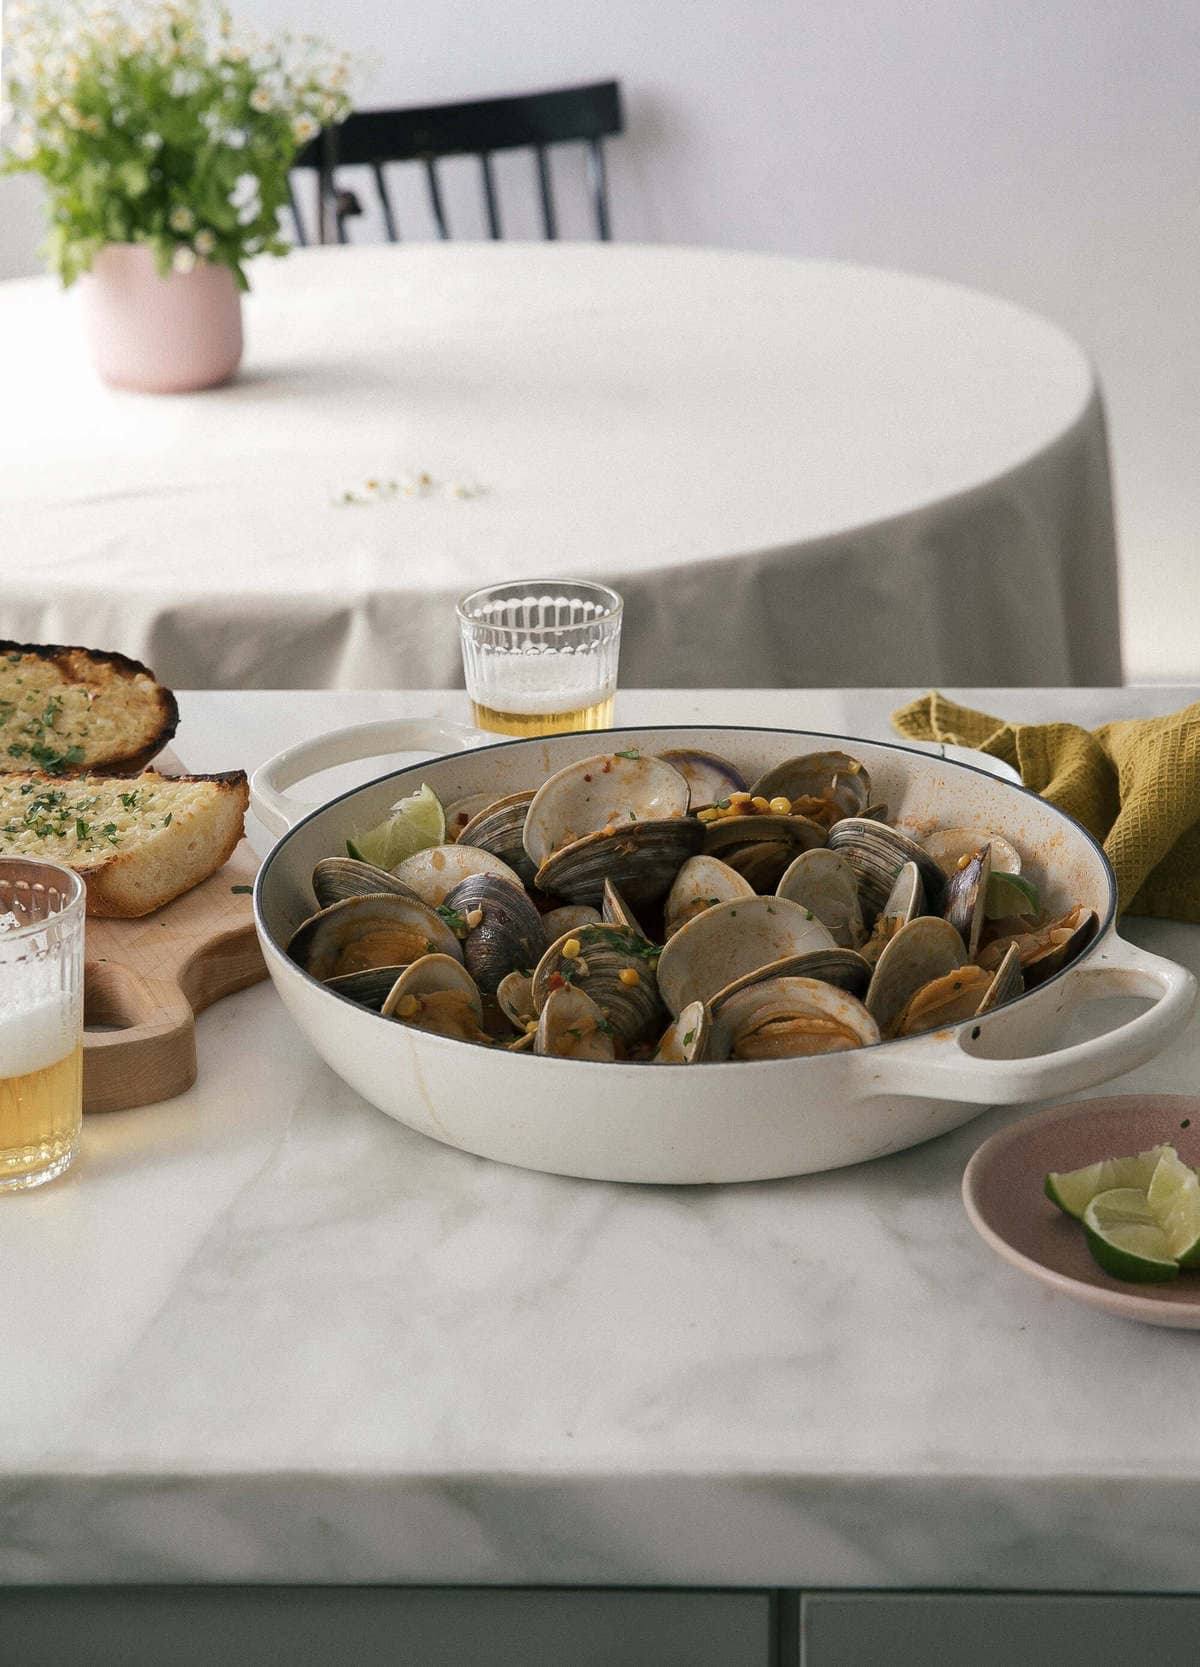 Chipolte Lime Braised Clams